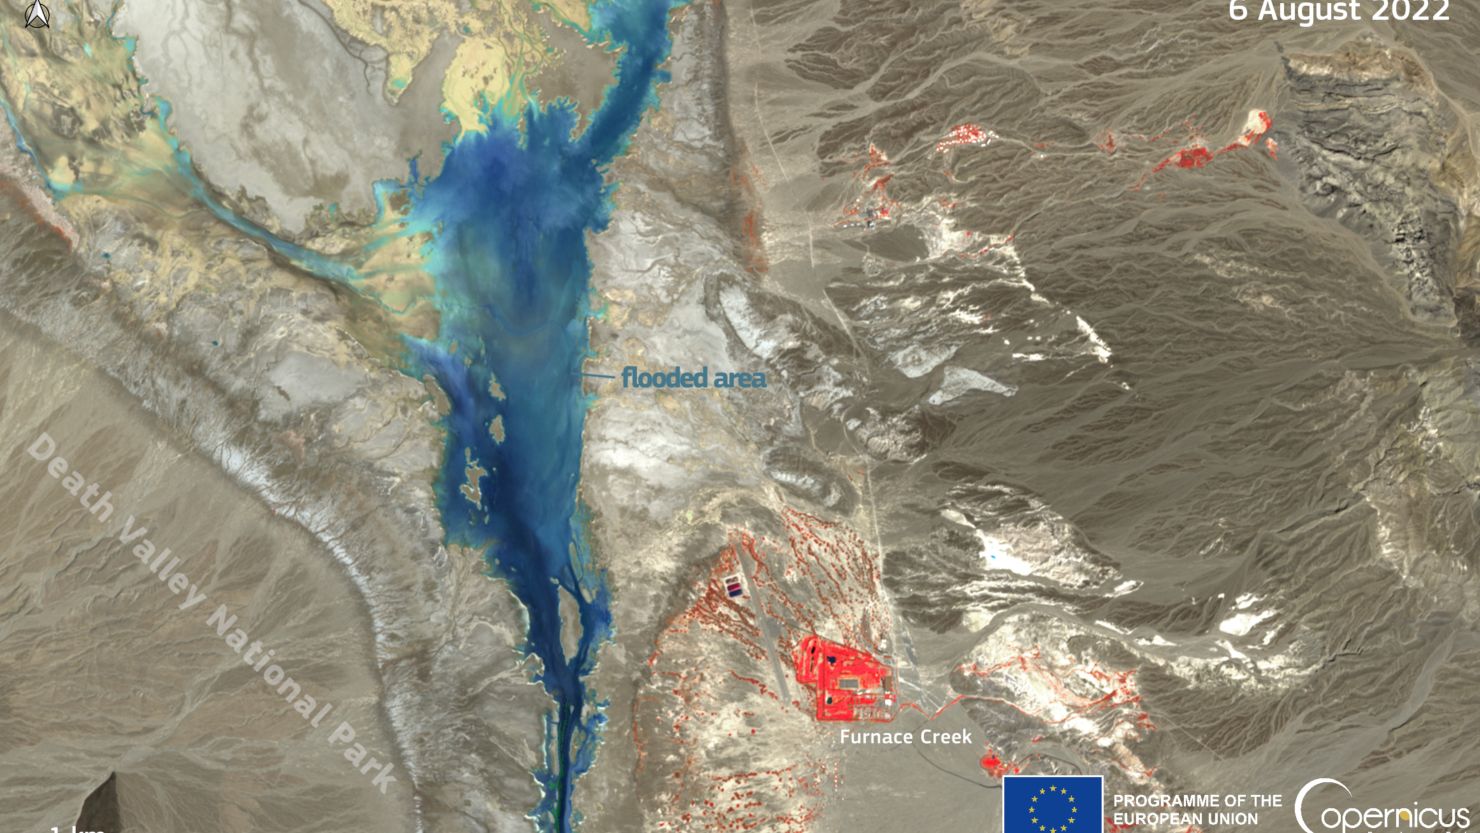 This image, acquired by one of the Copernicus Sentinel-2 satellites on 6 August, shows areas near Furnace Creek, Death Valley's hub, still flooded a day after the event. 